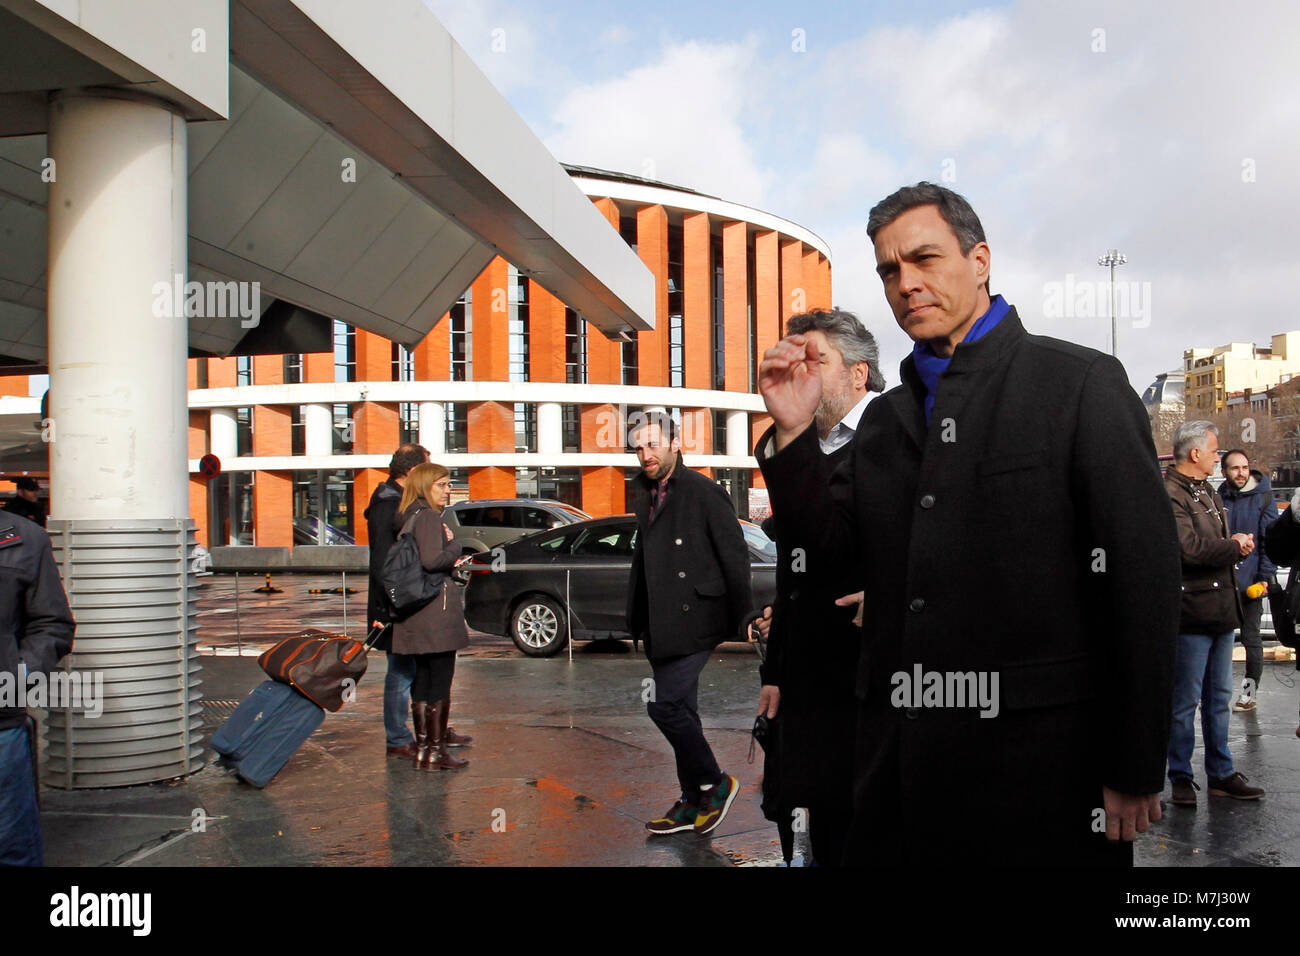 Madrid, Spain. 11th March, 2018. Politican Pedro Sanchez during a tribute in memory of the victims of the attack of 11-M 2004, at the train station of Atocha on Sunday 11 March 2018. Credit: Gtres Información más Comuniación on line, S.L./Alamy Live News Stock Photo